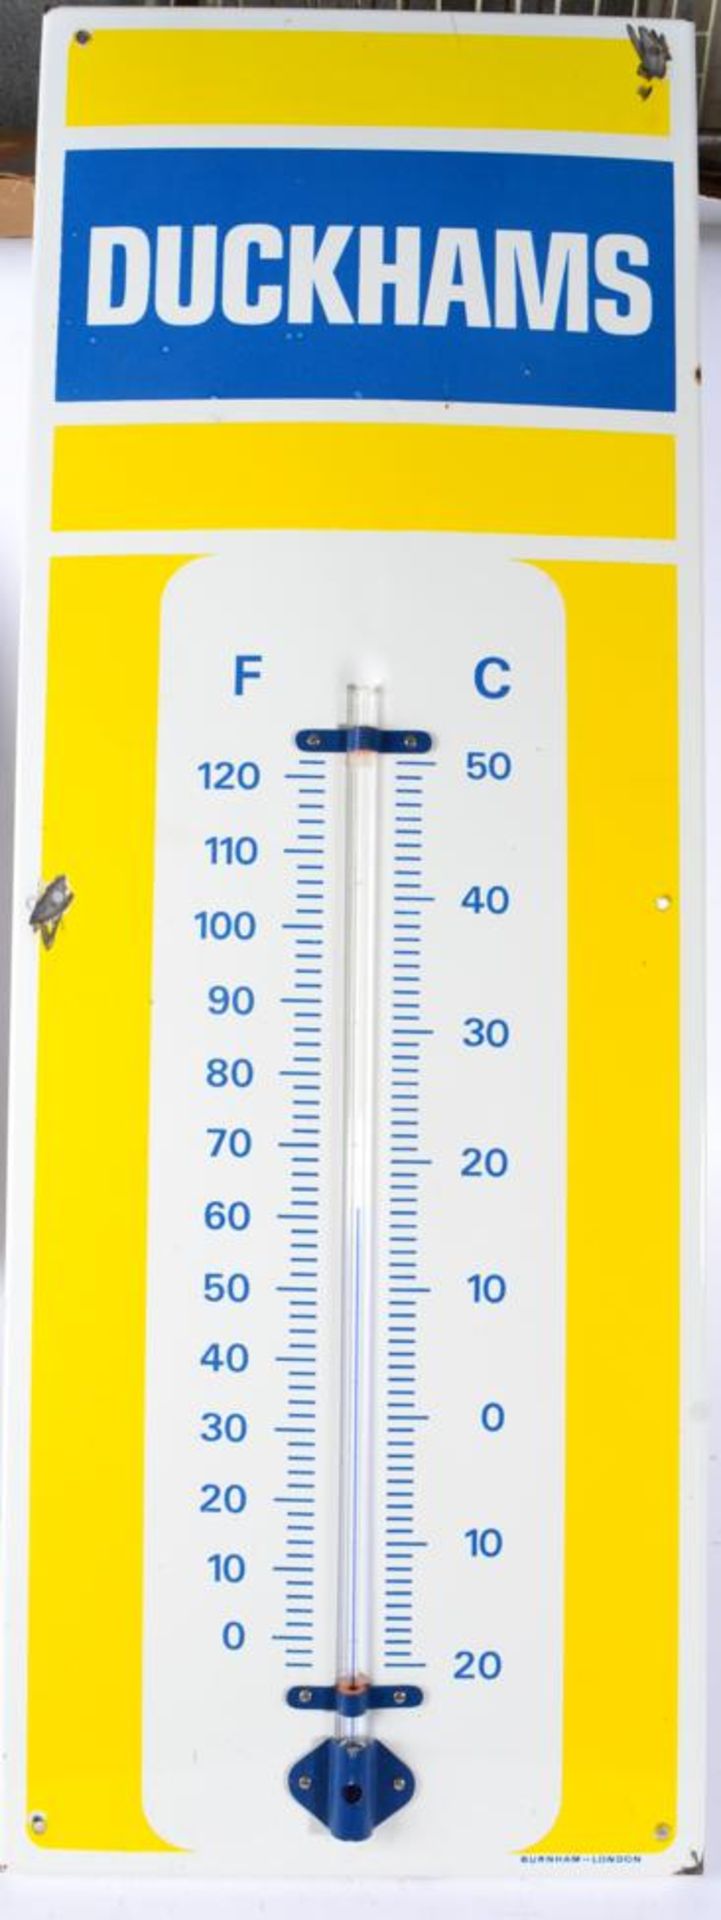 A DUCKHAMS Single-Sided Metal Advertising Sign/Thermometer, with six drill holes, the corner printed